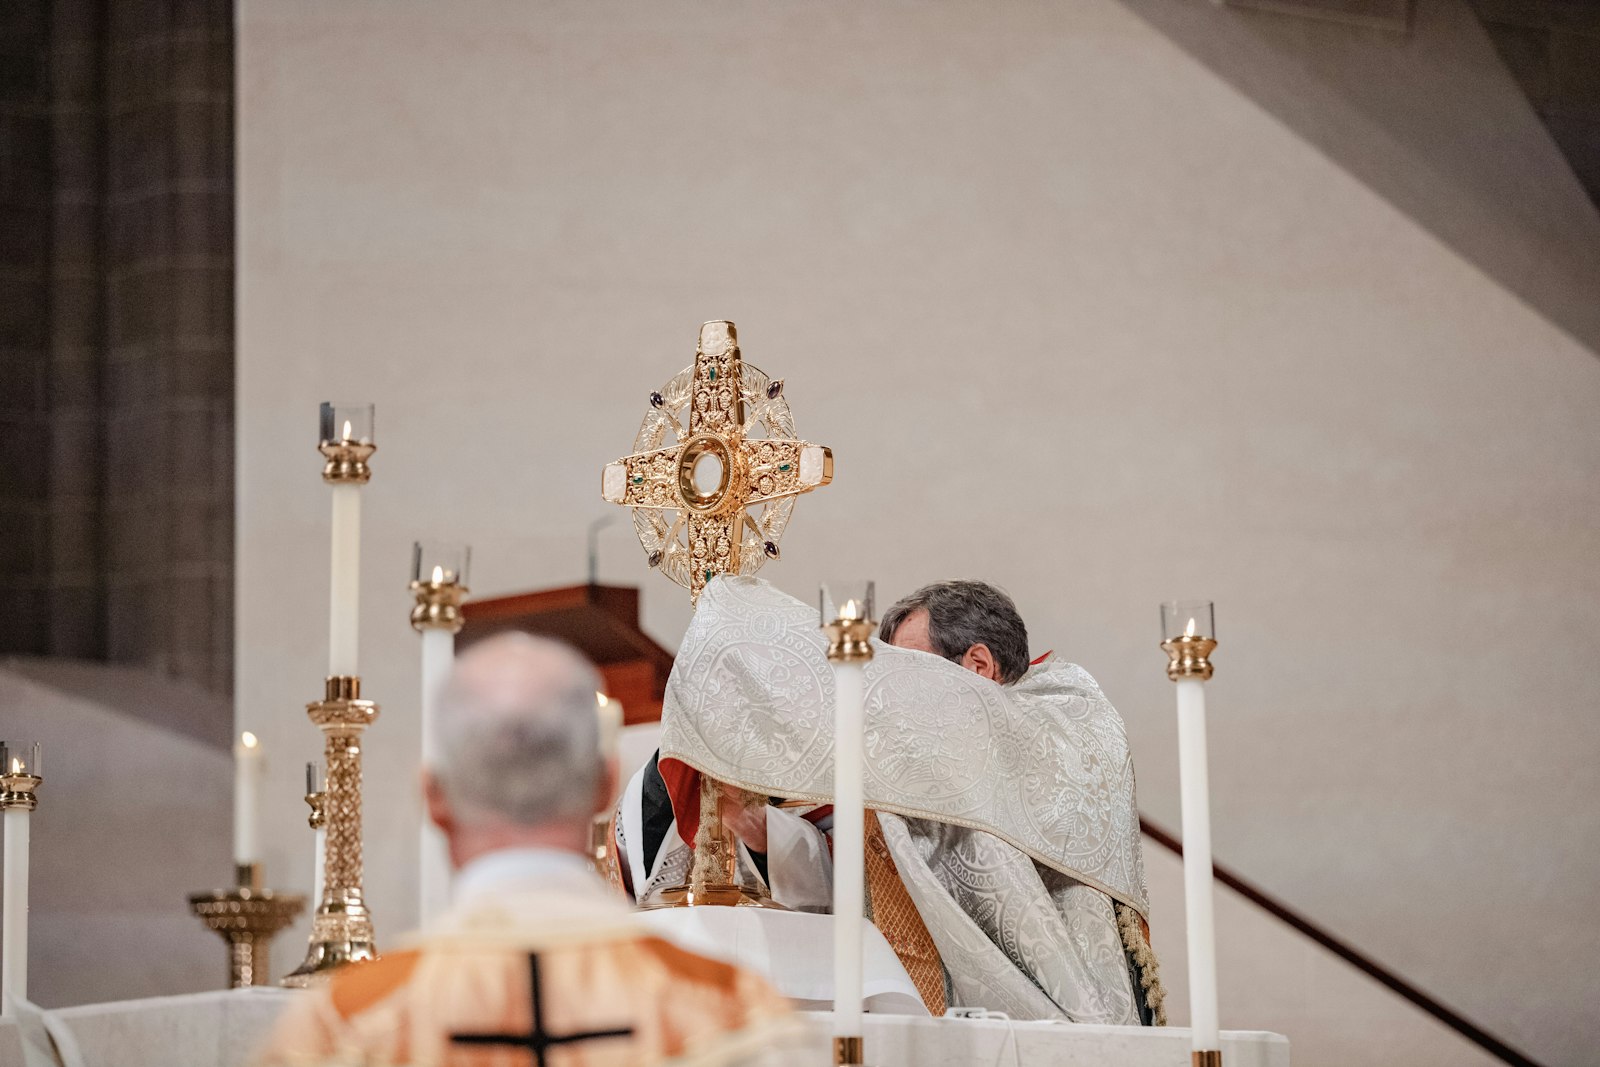 Archbishop Allen H. Vigneron elevates the monstrance with the Blessed Sacrament during benediction after Mass on the feast of Corpus Christi, June 11, at the Cathedral of the Most Blessed Sacrament in Detroit. (Alissa Tuttle | Special to Detroit Catholic)